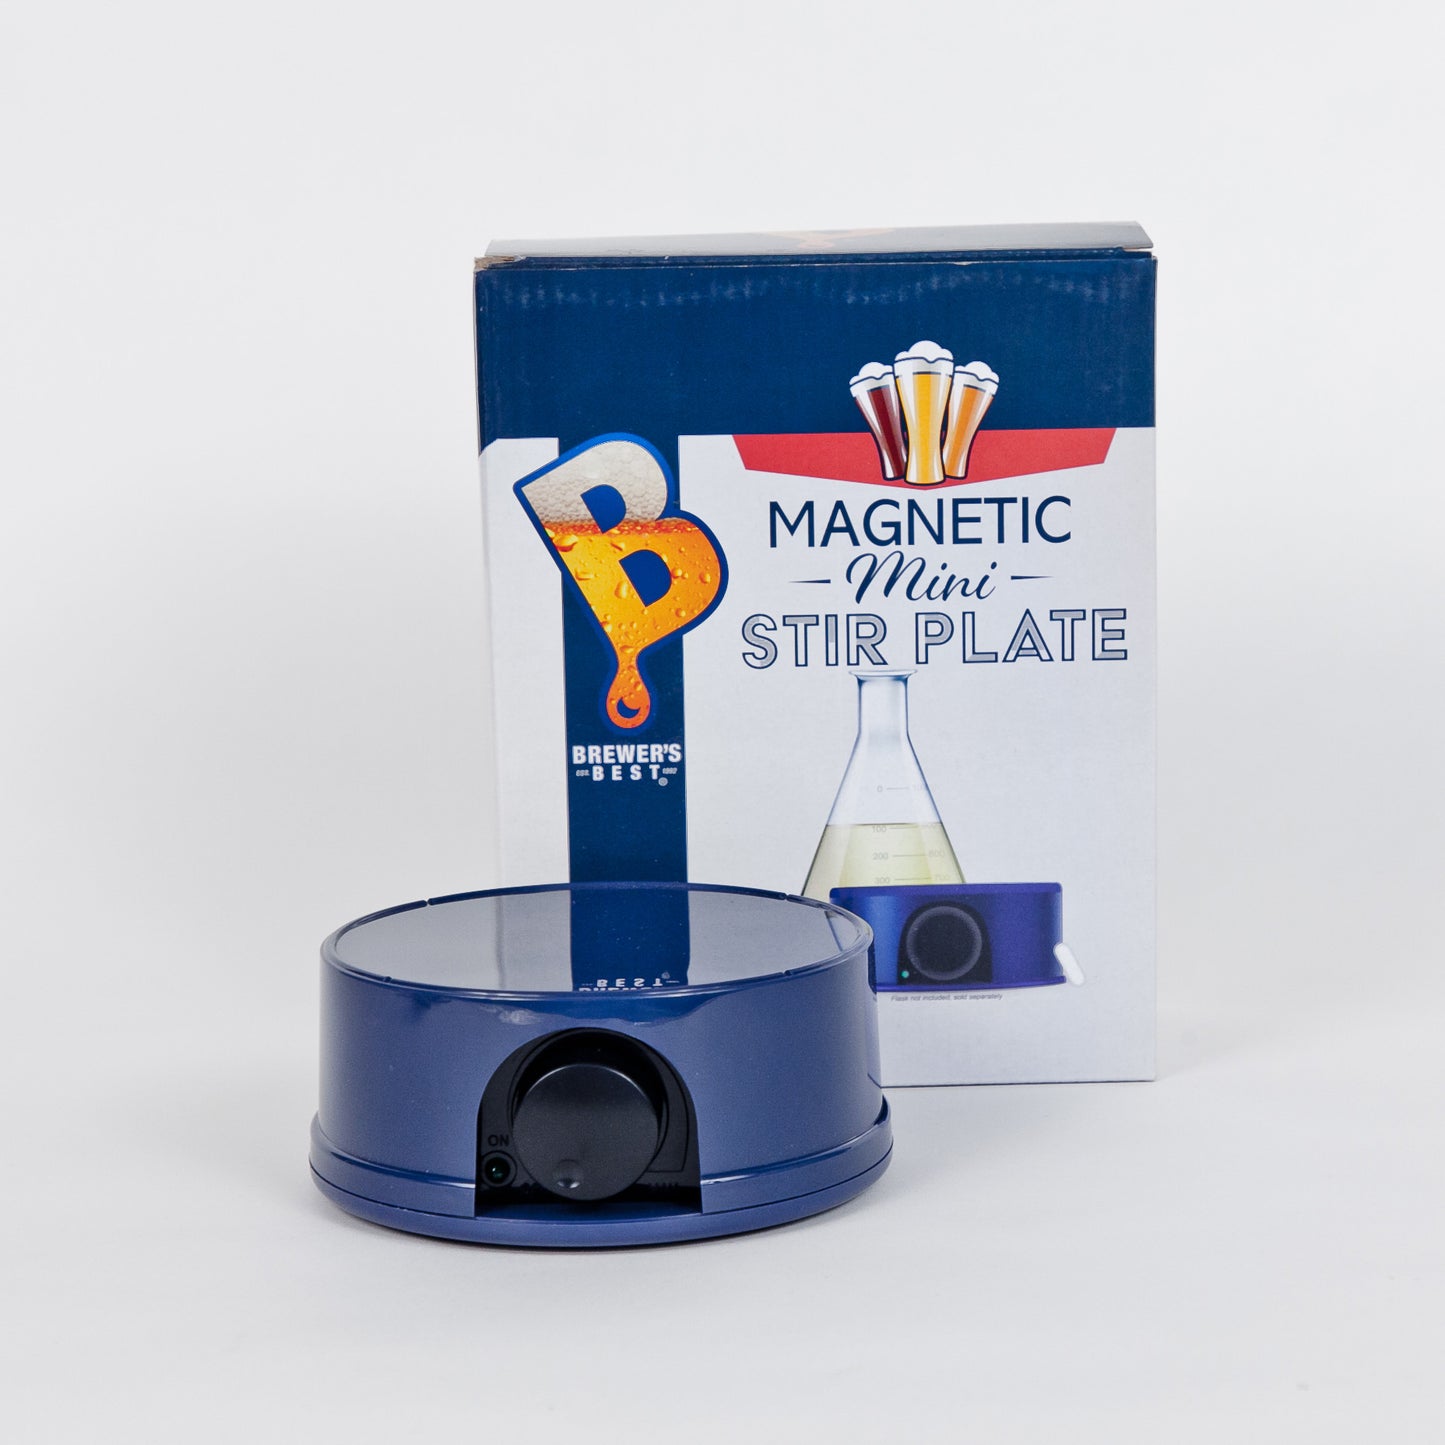 Brewers Best Magnetic Stir Plate